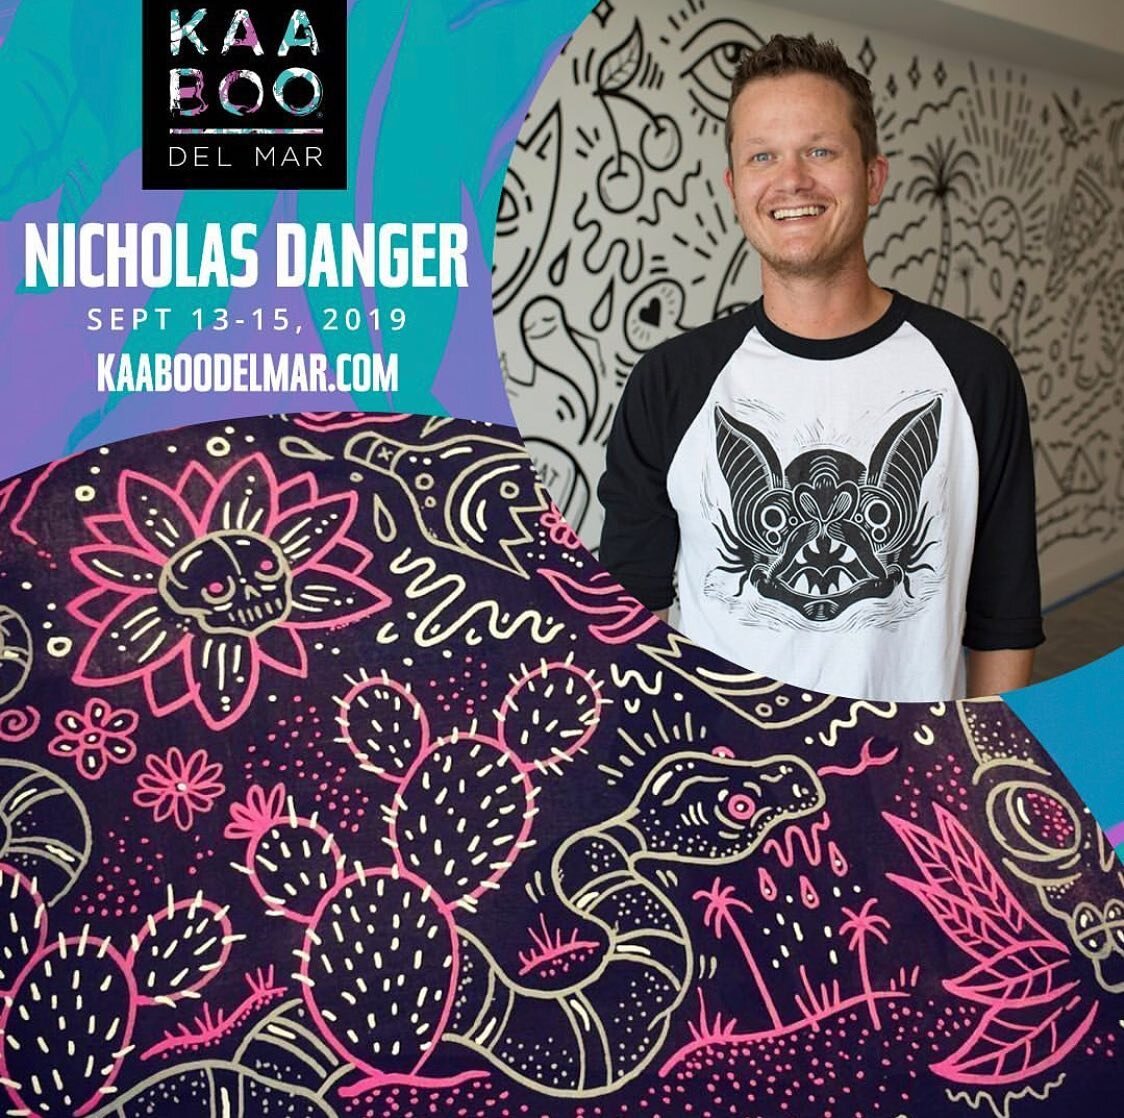 Many artists we like to support are showing at @kaaboodelmar this weekend. Here&rsquo;s @nicholasdanger he&rsquo;ll be painting live all weekend. Make sure you stop by and say hi!